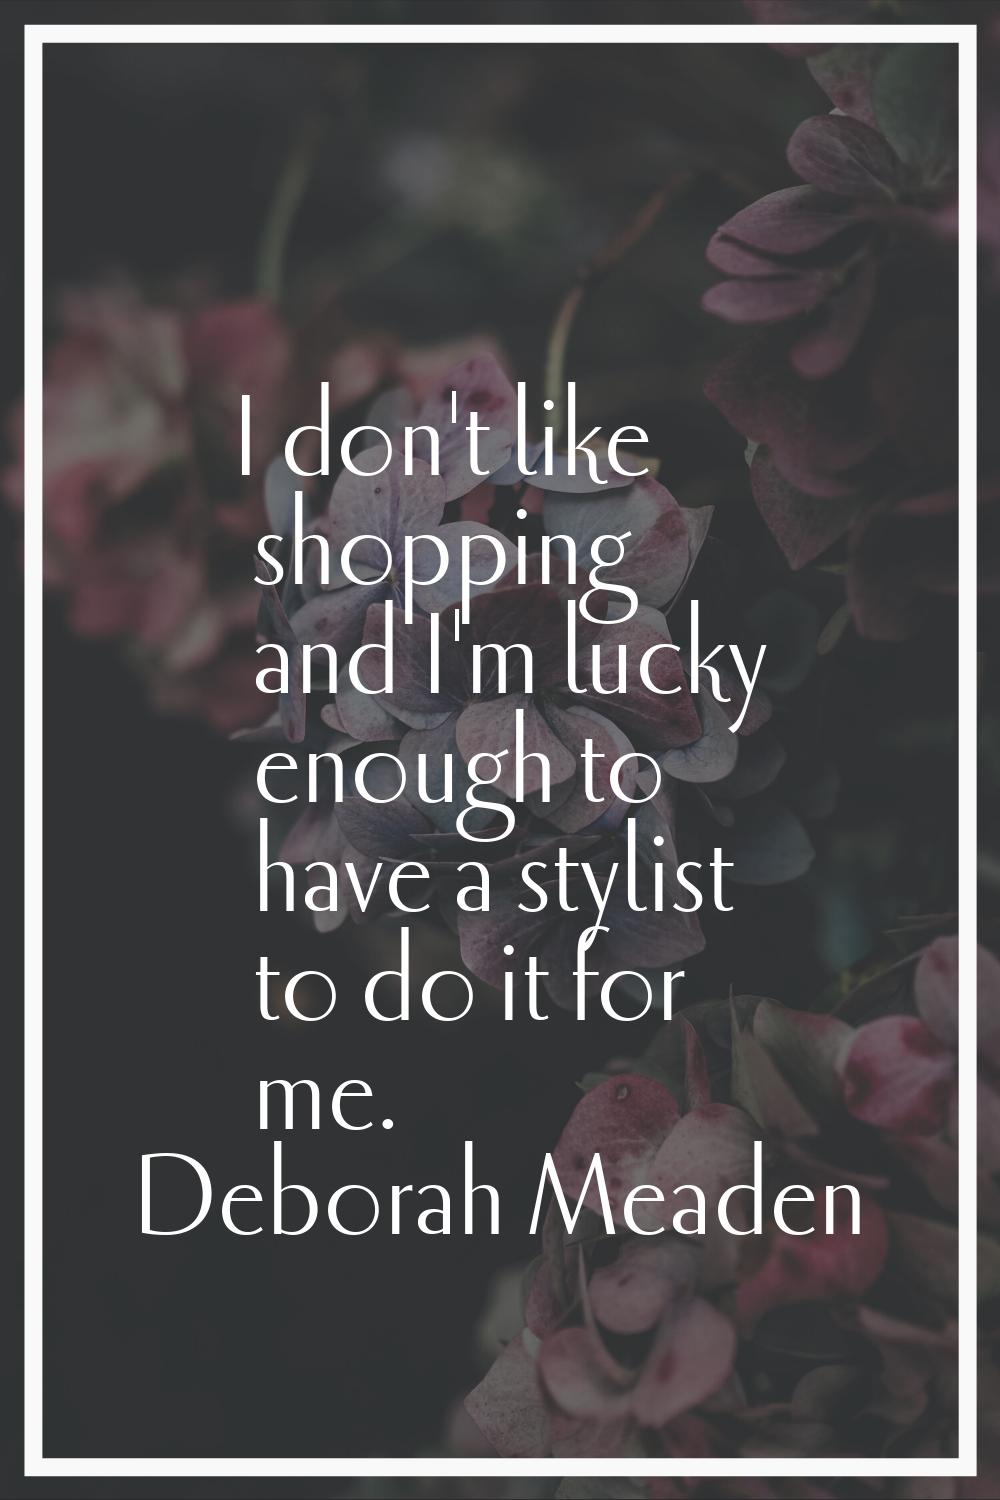 I don't like shopping and I'm lucky enough to have a stylist to do it for me.